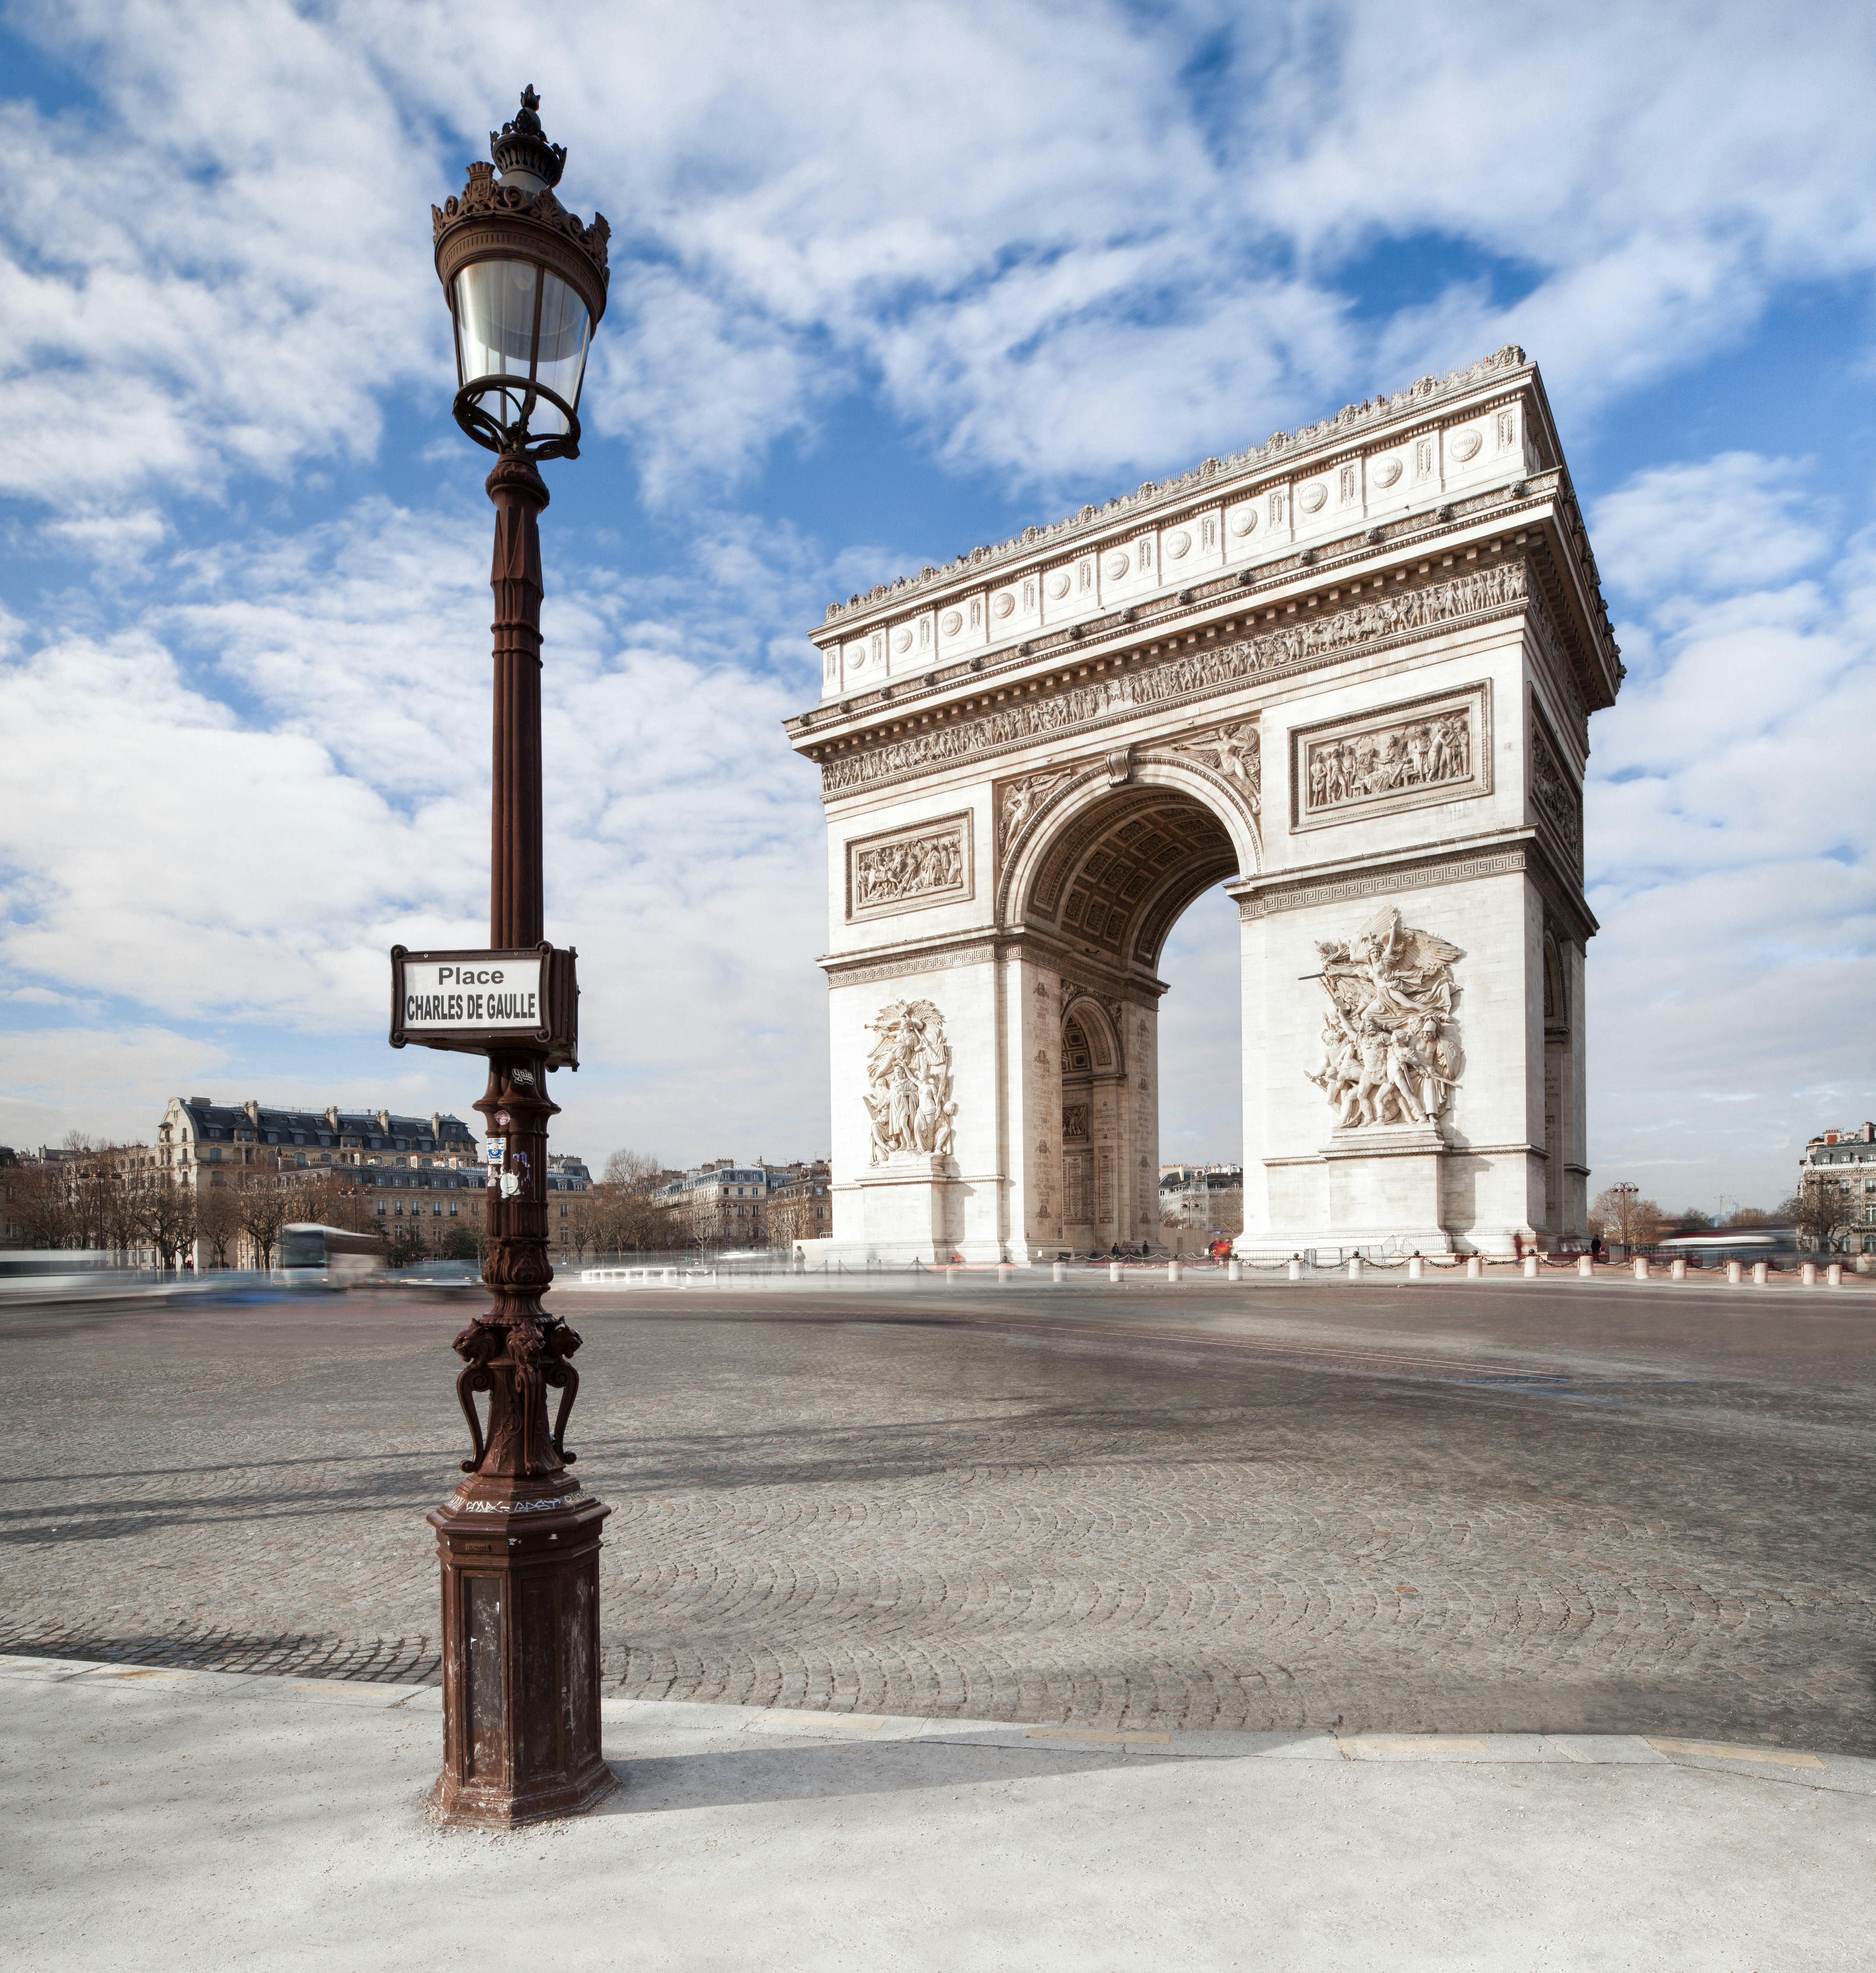 Tickets to the Arc de Triomphe's rooftop Musement